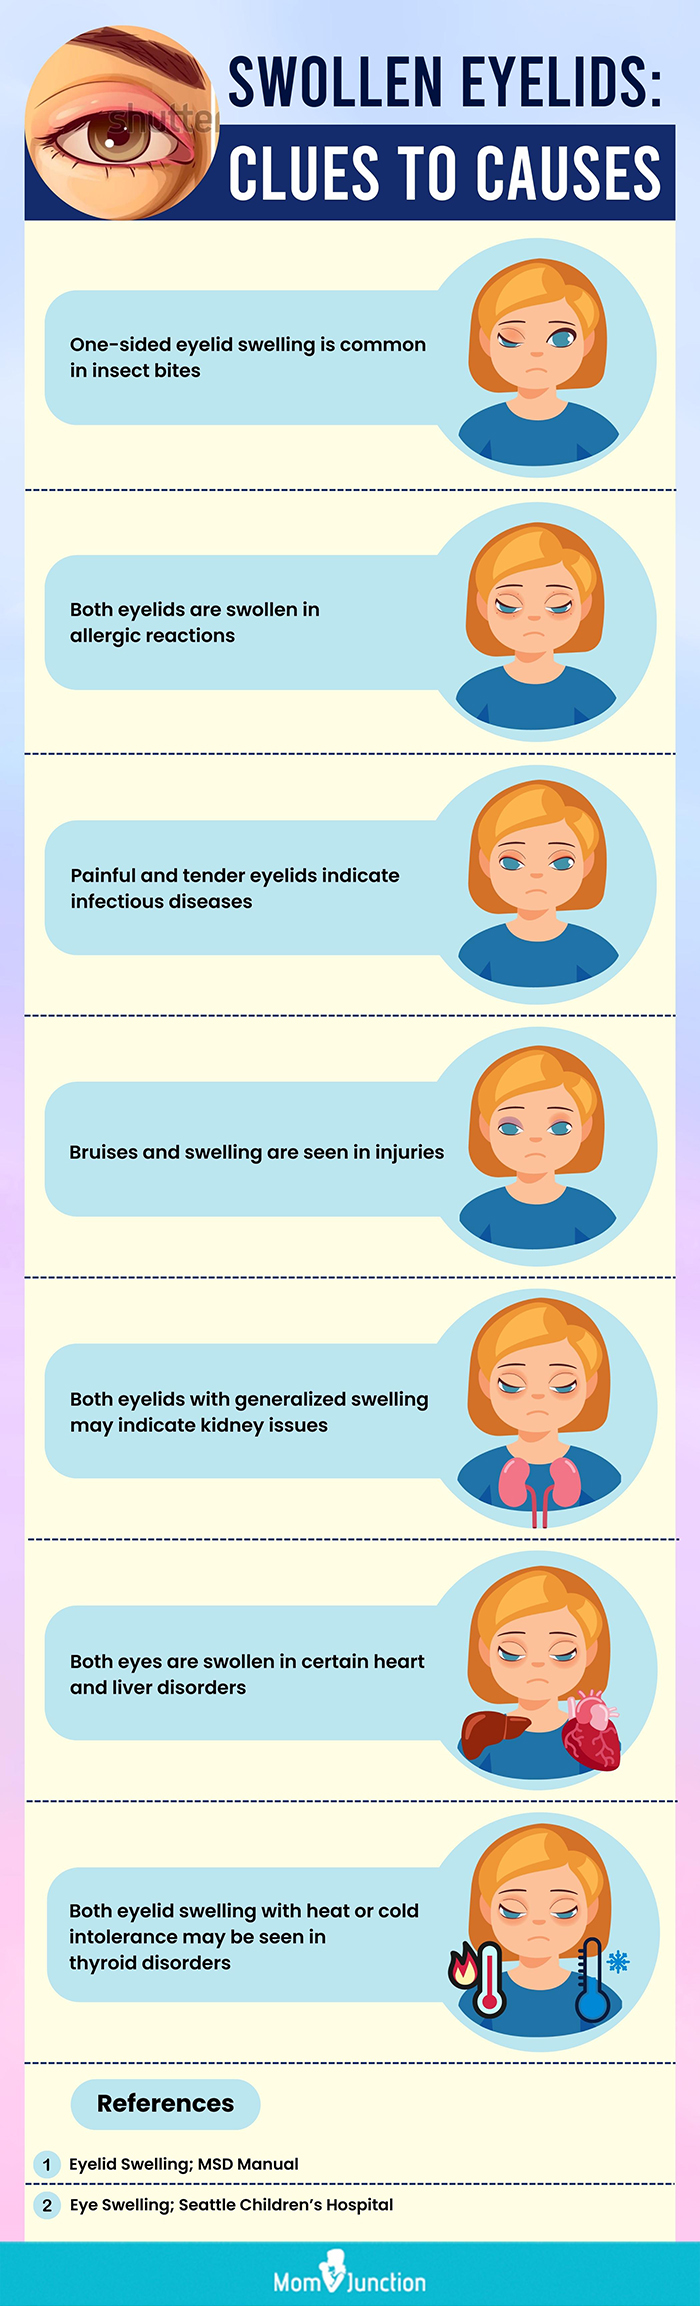 swollen eyelids clues to causes (infographic)